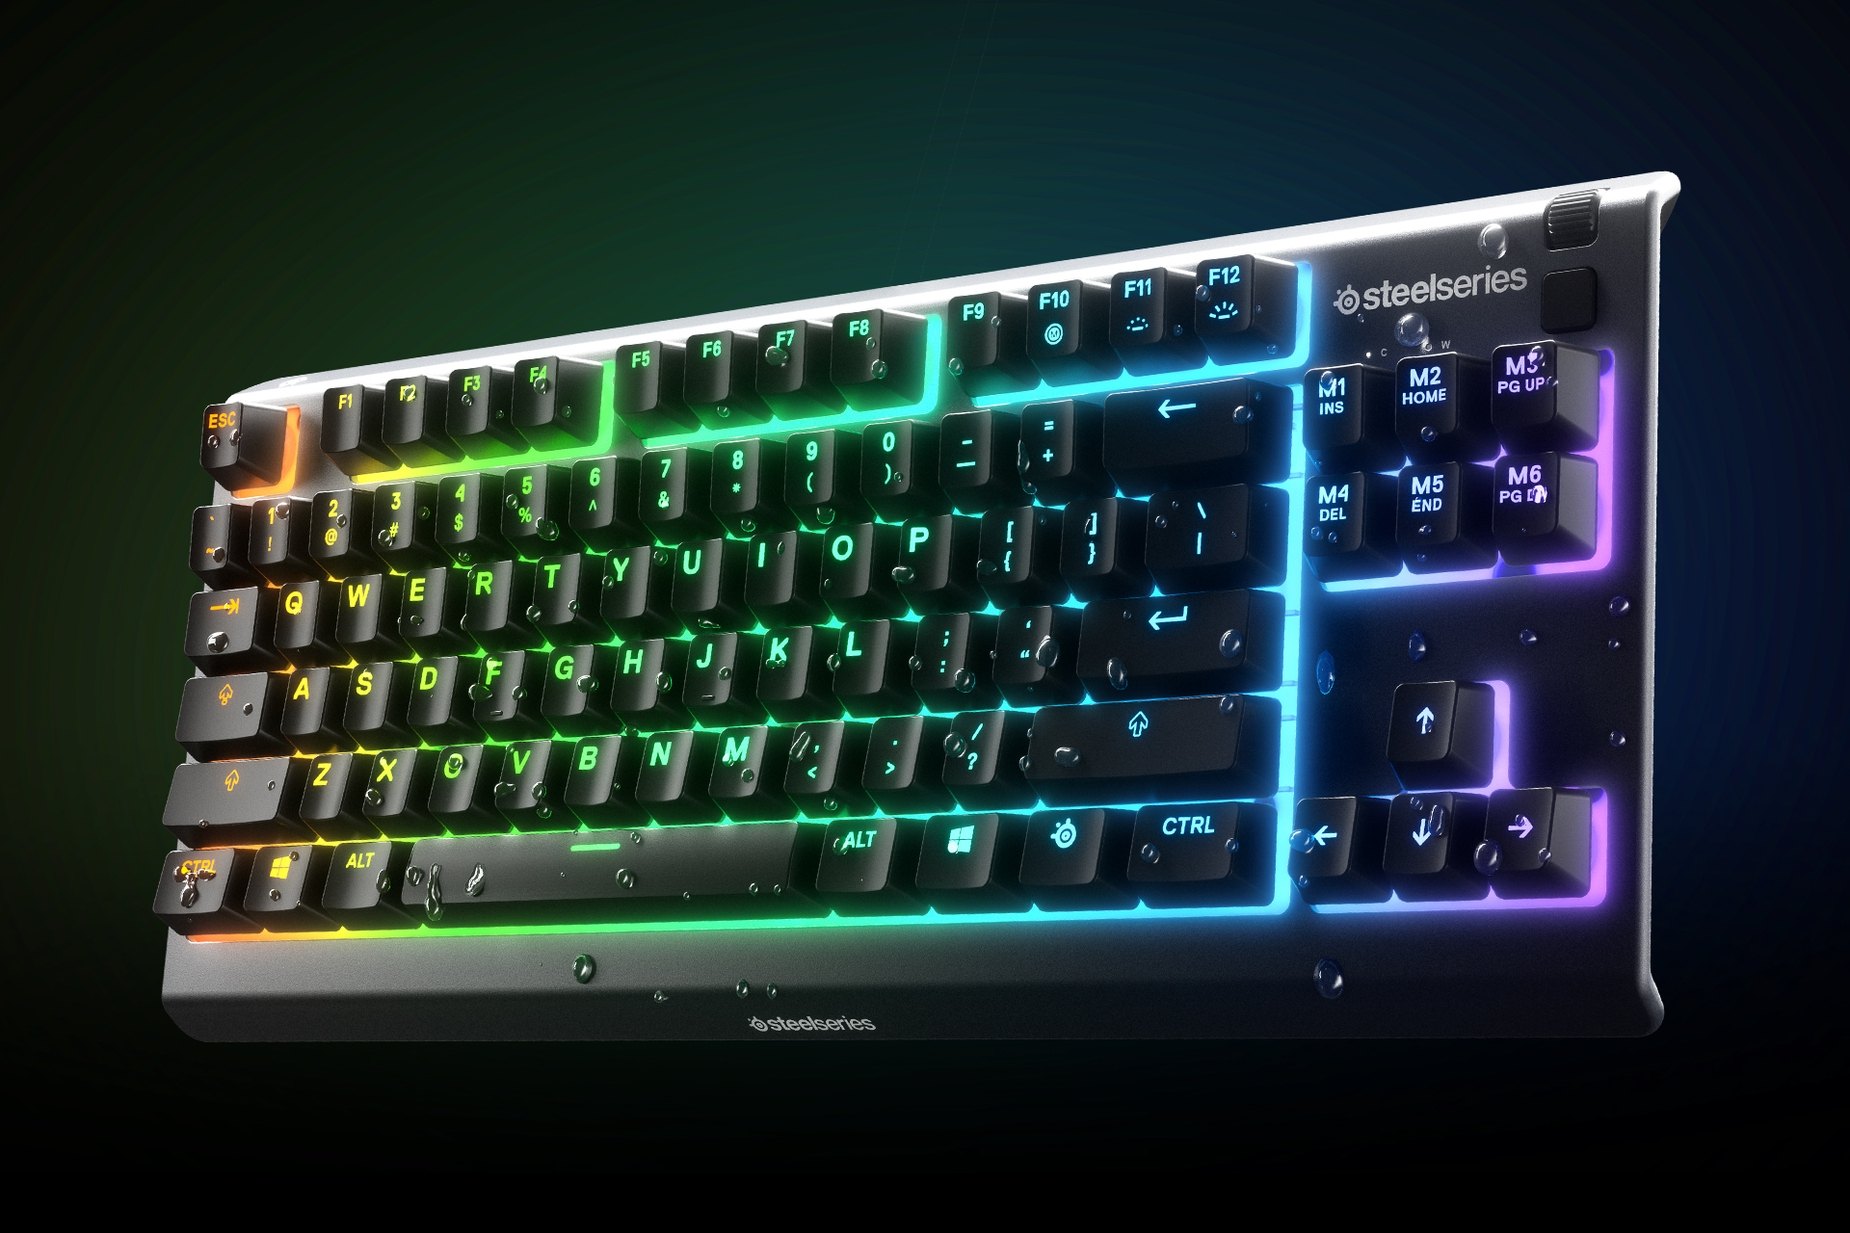 
 Apex 3 TKL keyboard with drops of water beading up on surface to illustrate innovative water resistant qualities.
 